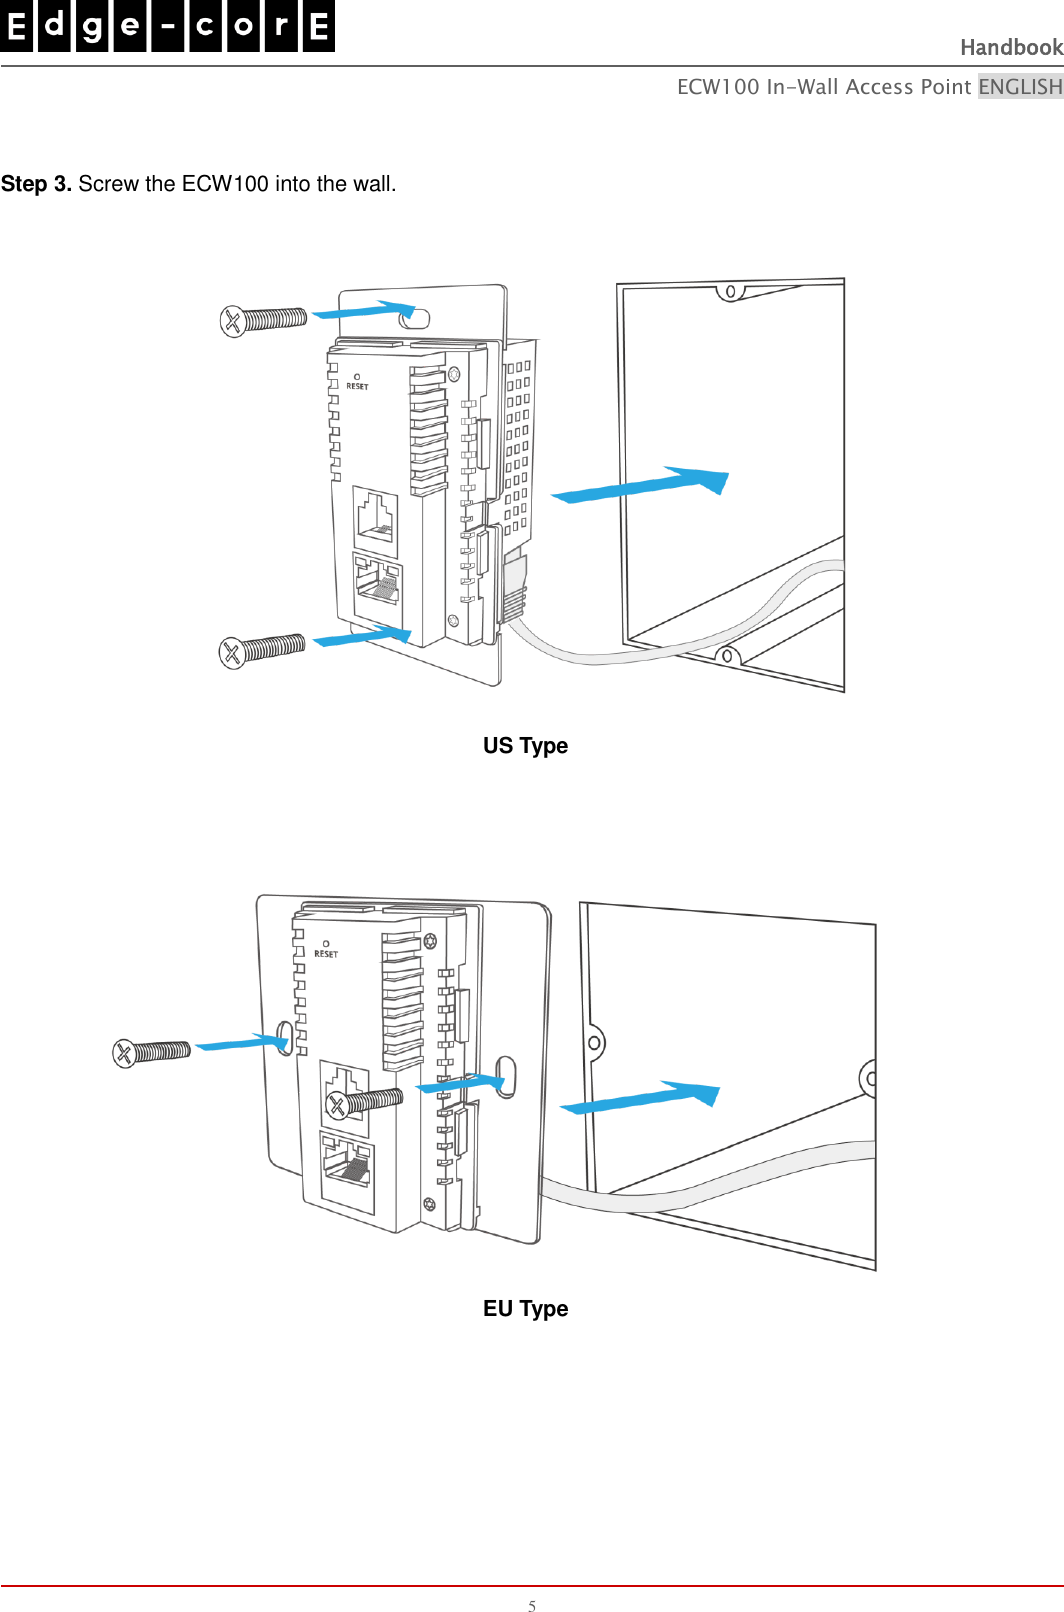   Handbook ECW100 In-Wall Access Point ENGLISH 5  Step 3. Screw the ECW100 into the wall.          US Type          EU Type     